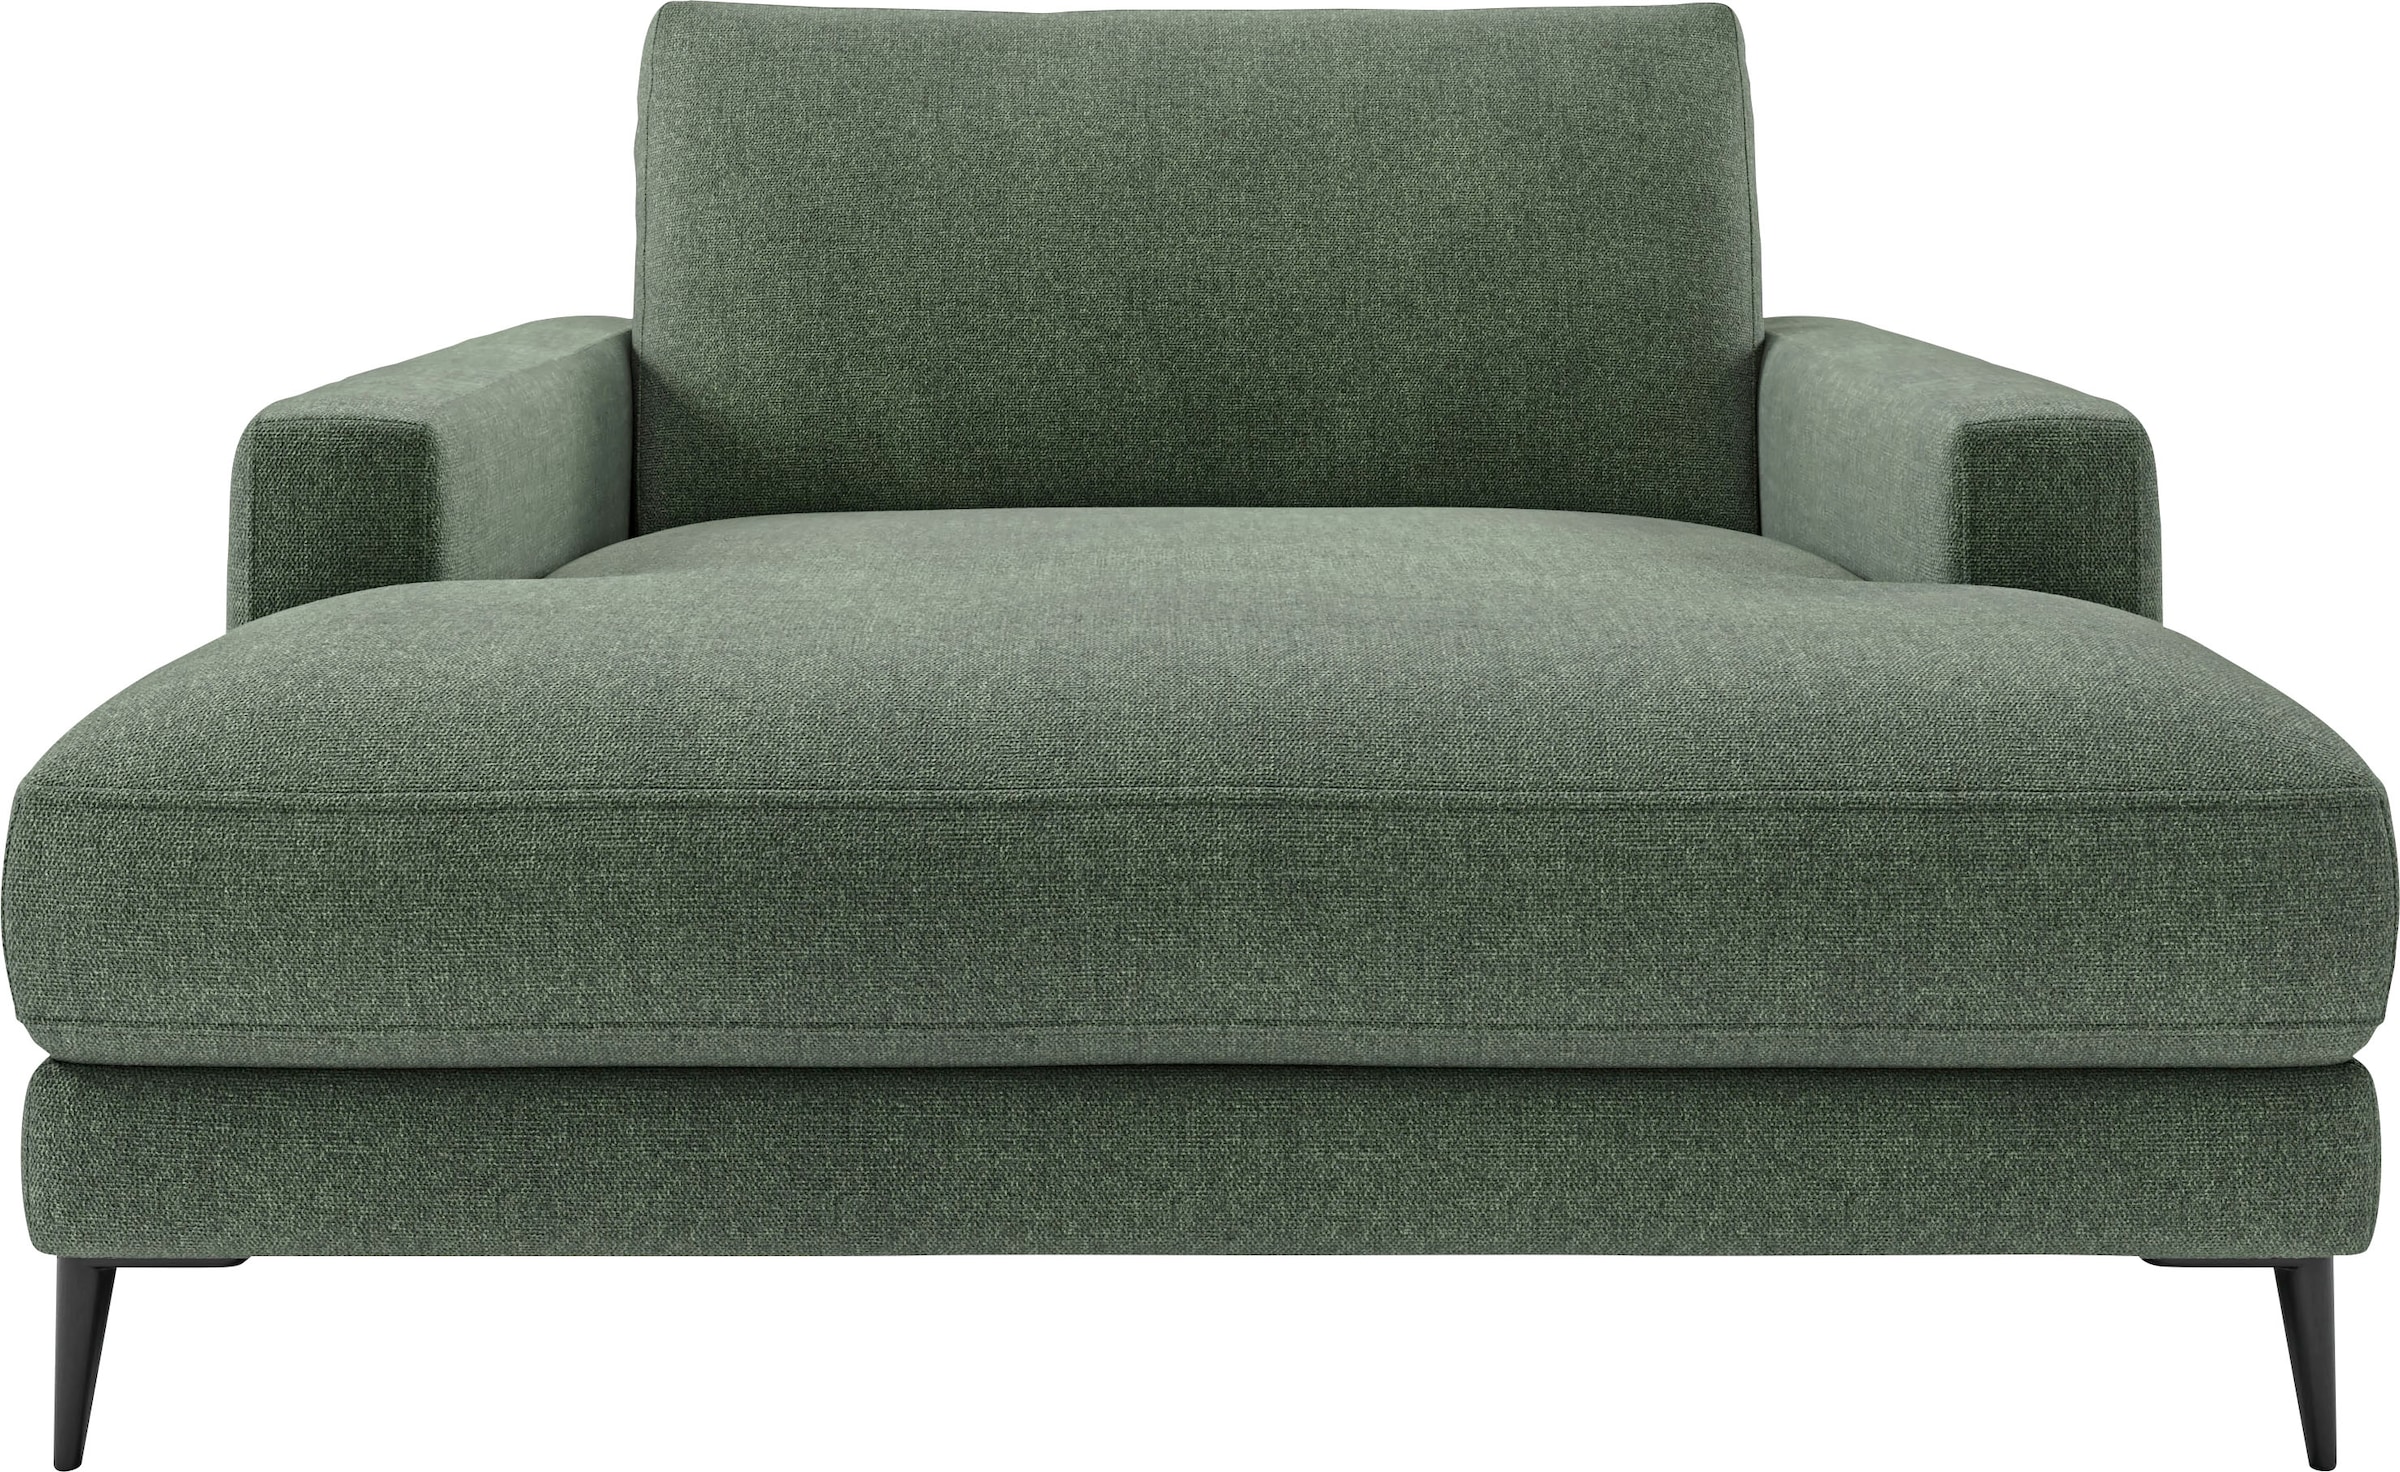 INOSIGN Chaiselongue "Downtown Loungemöbel zum Relaxen, B/T/H: 132/170/84 cm", auch in Bouclé, Cord und Easy care - leic